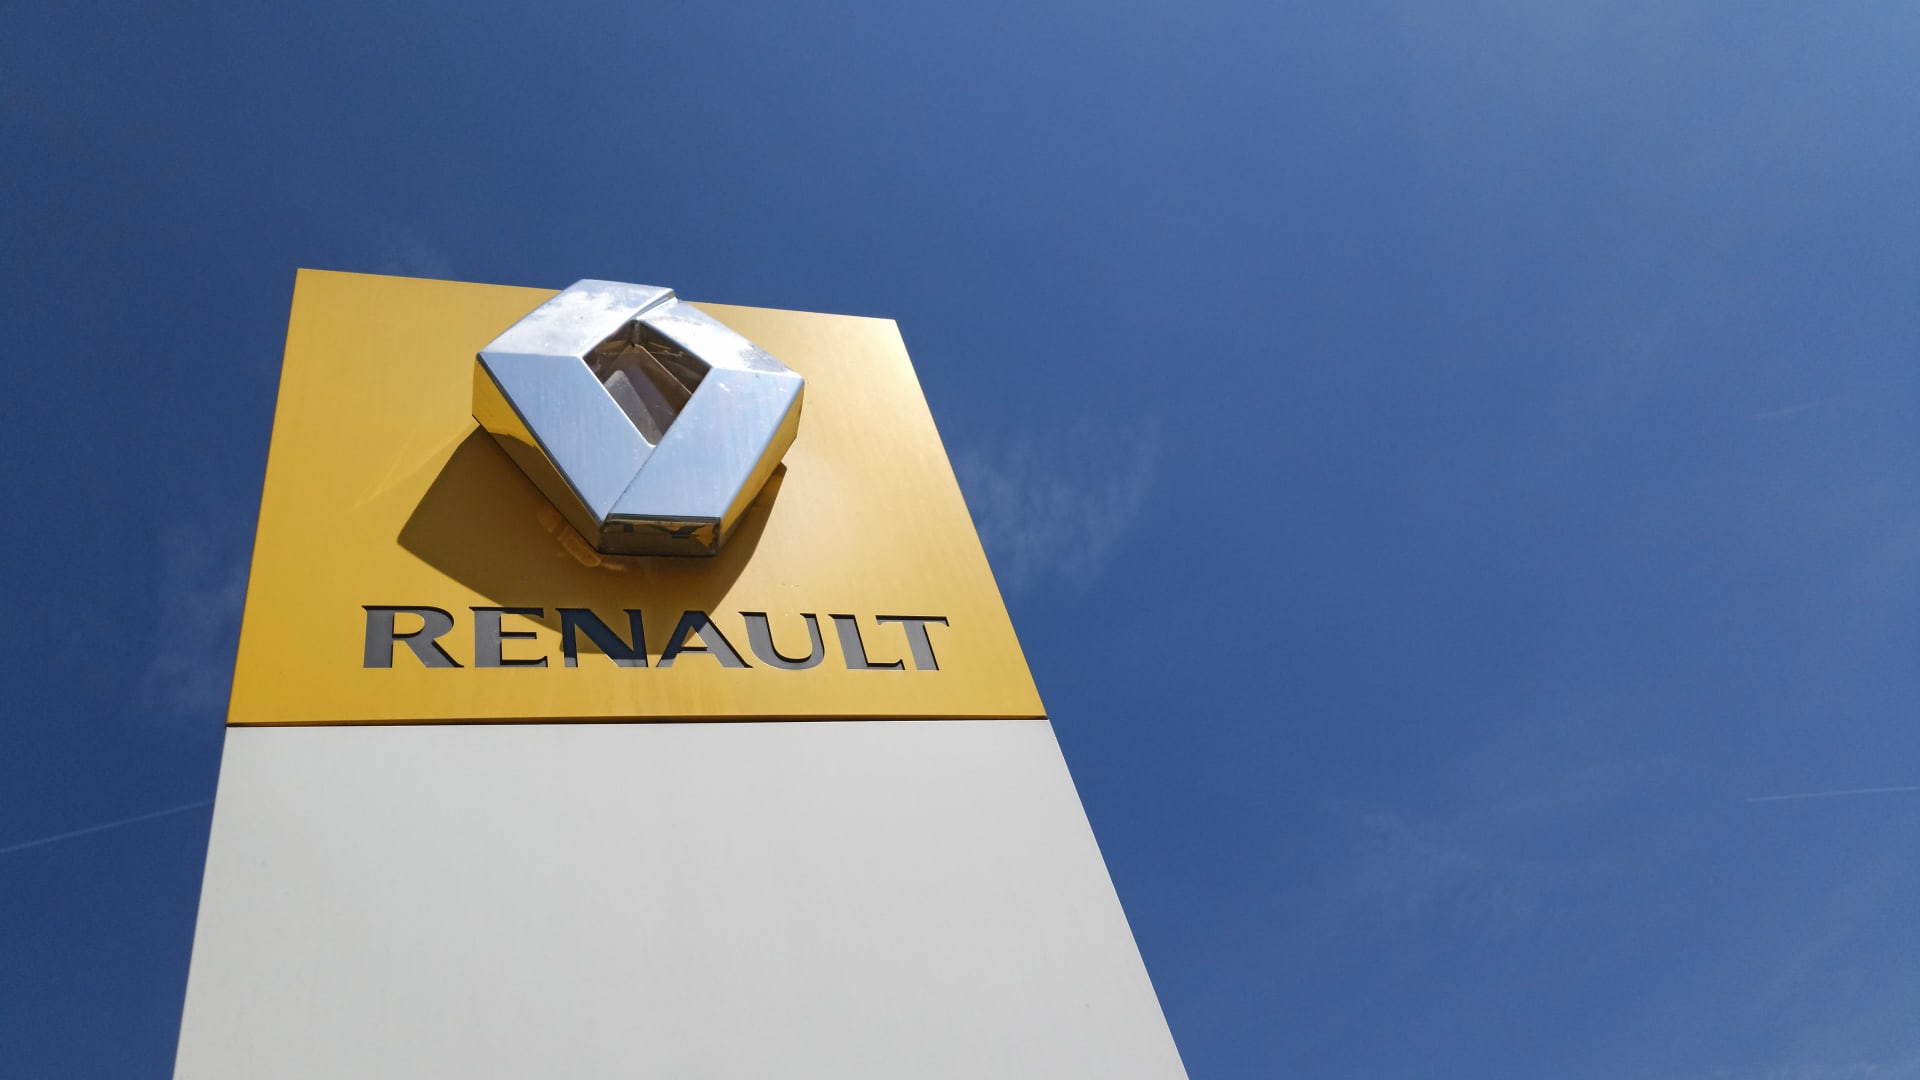 Renault plans to harness geothermal energy and help heat plant